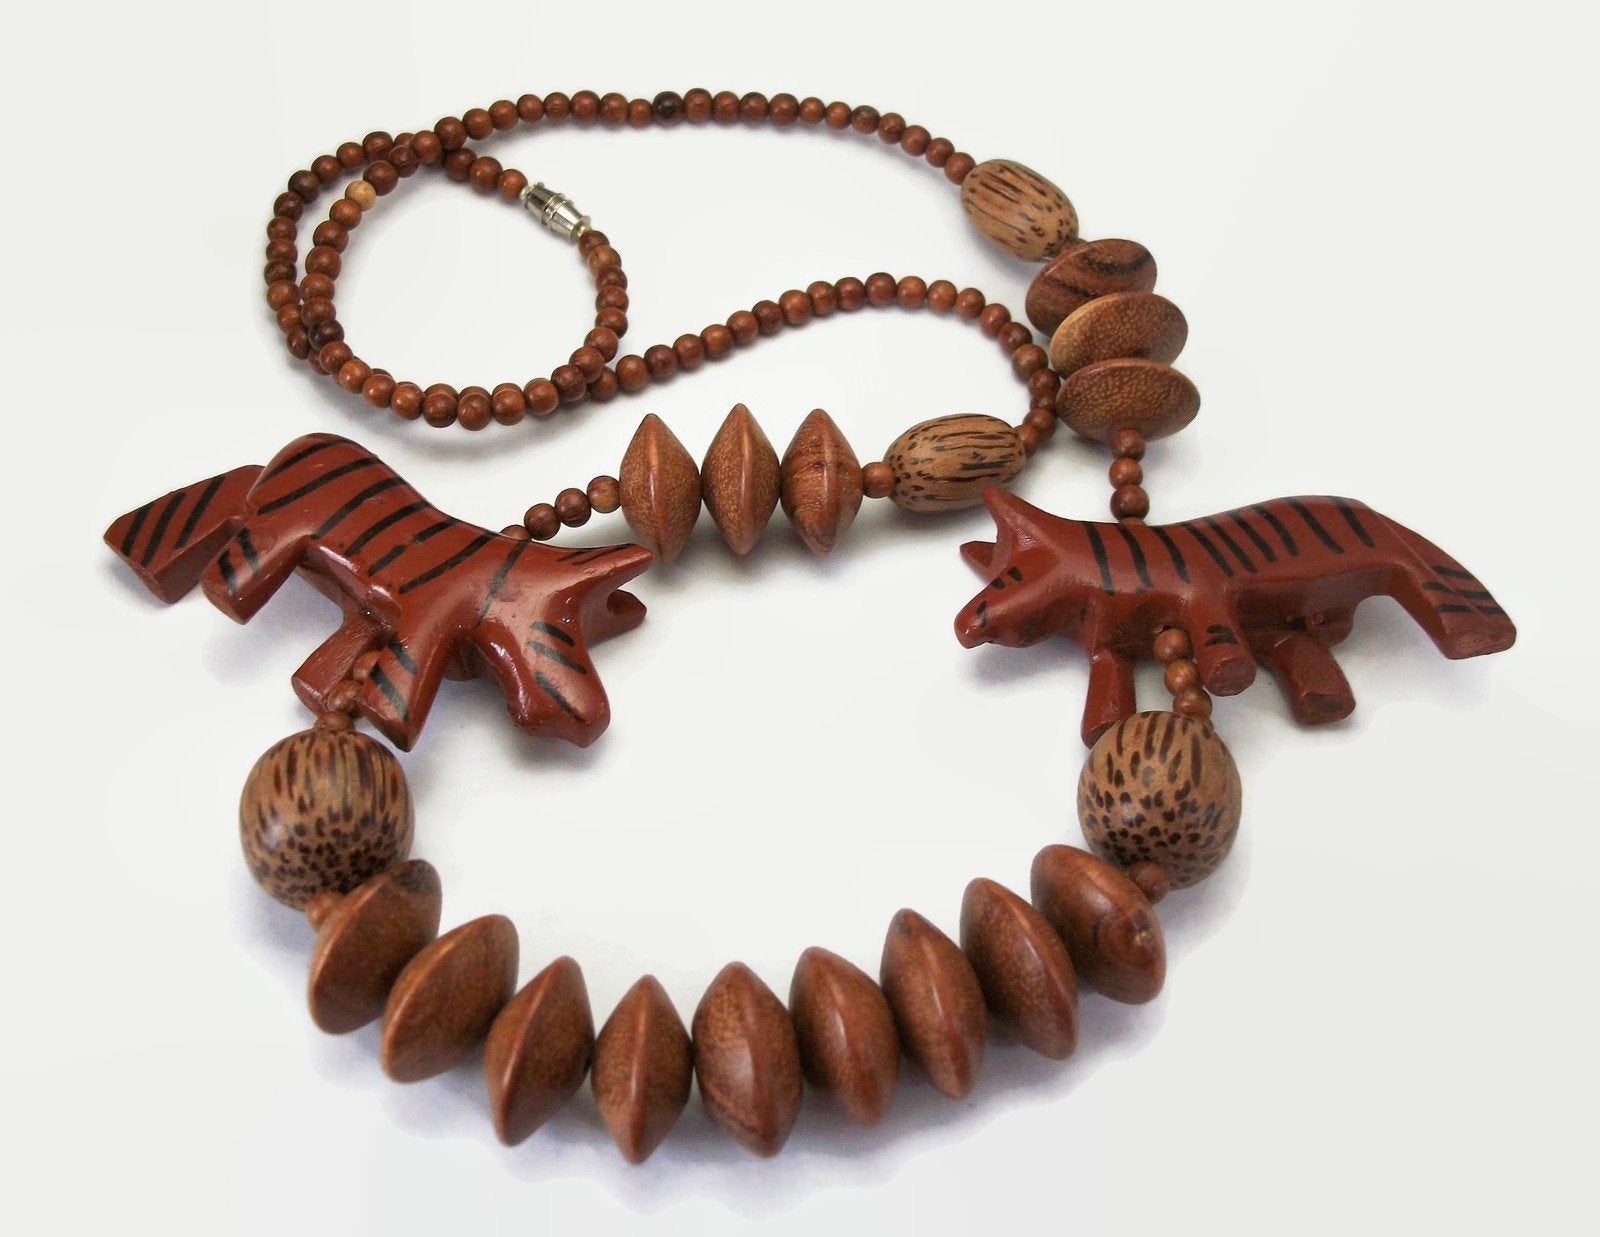 WOOD WOODEN BEADED NECKLACE VINTAGE LARGE BALL BEADS … - Gem